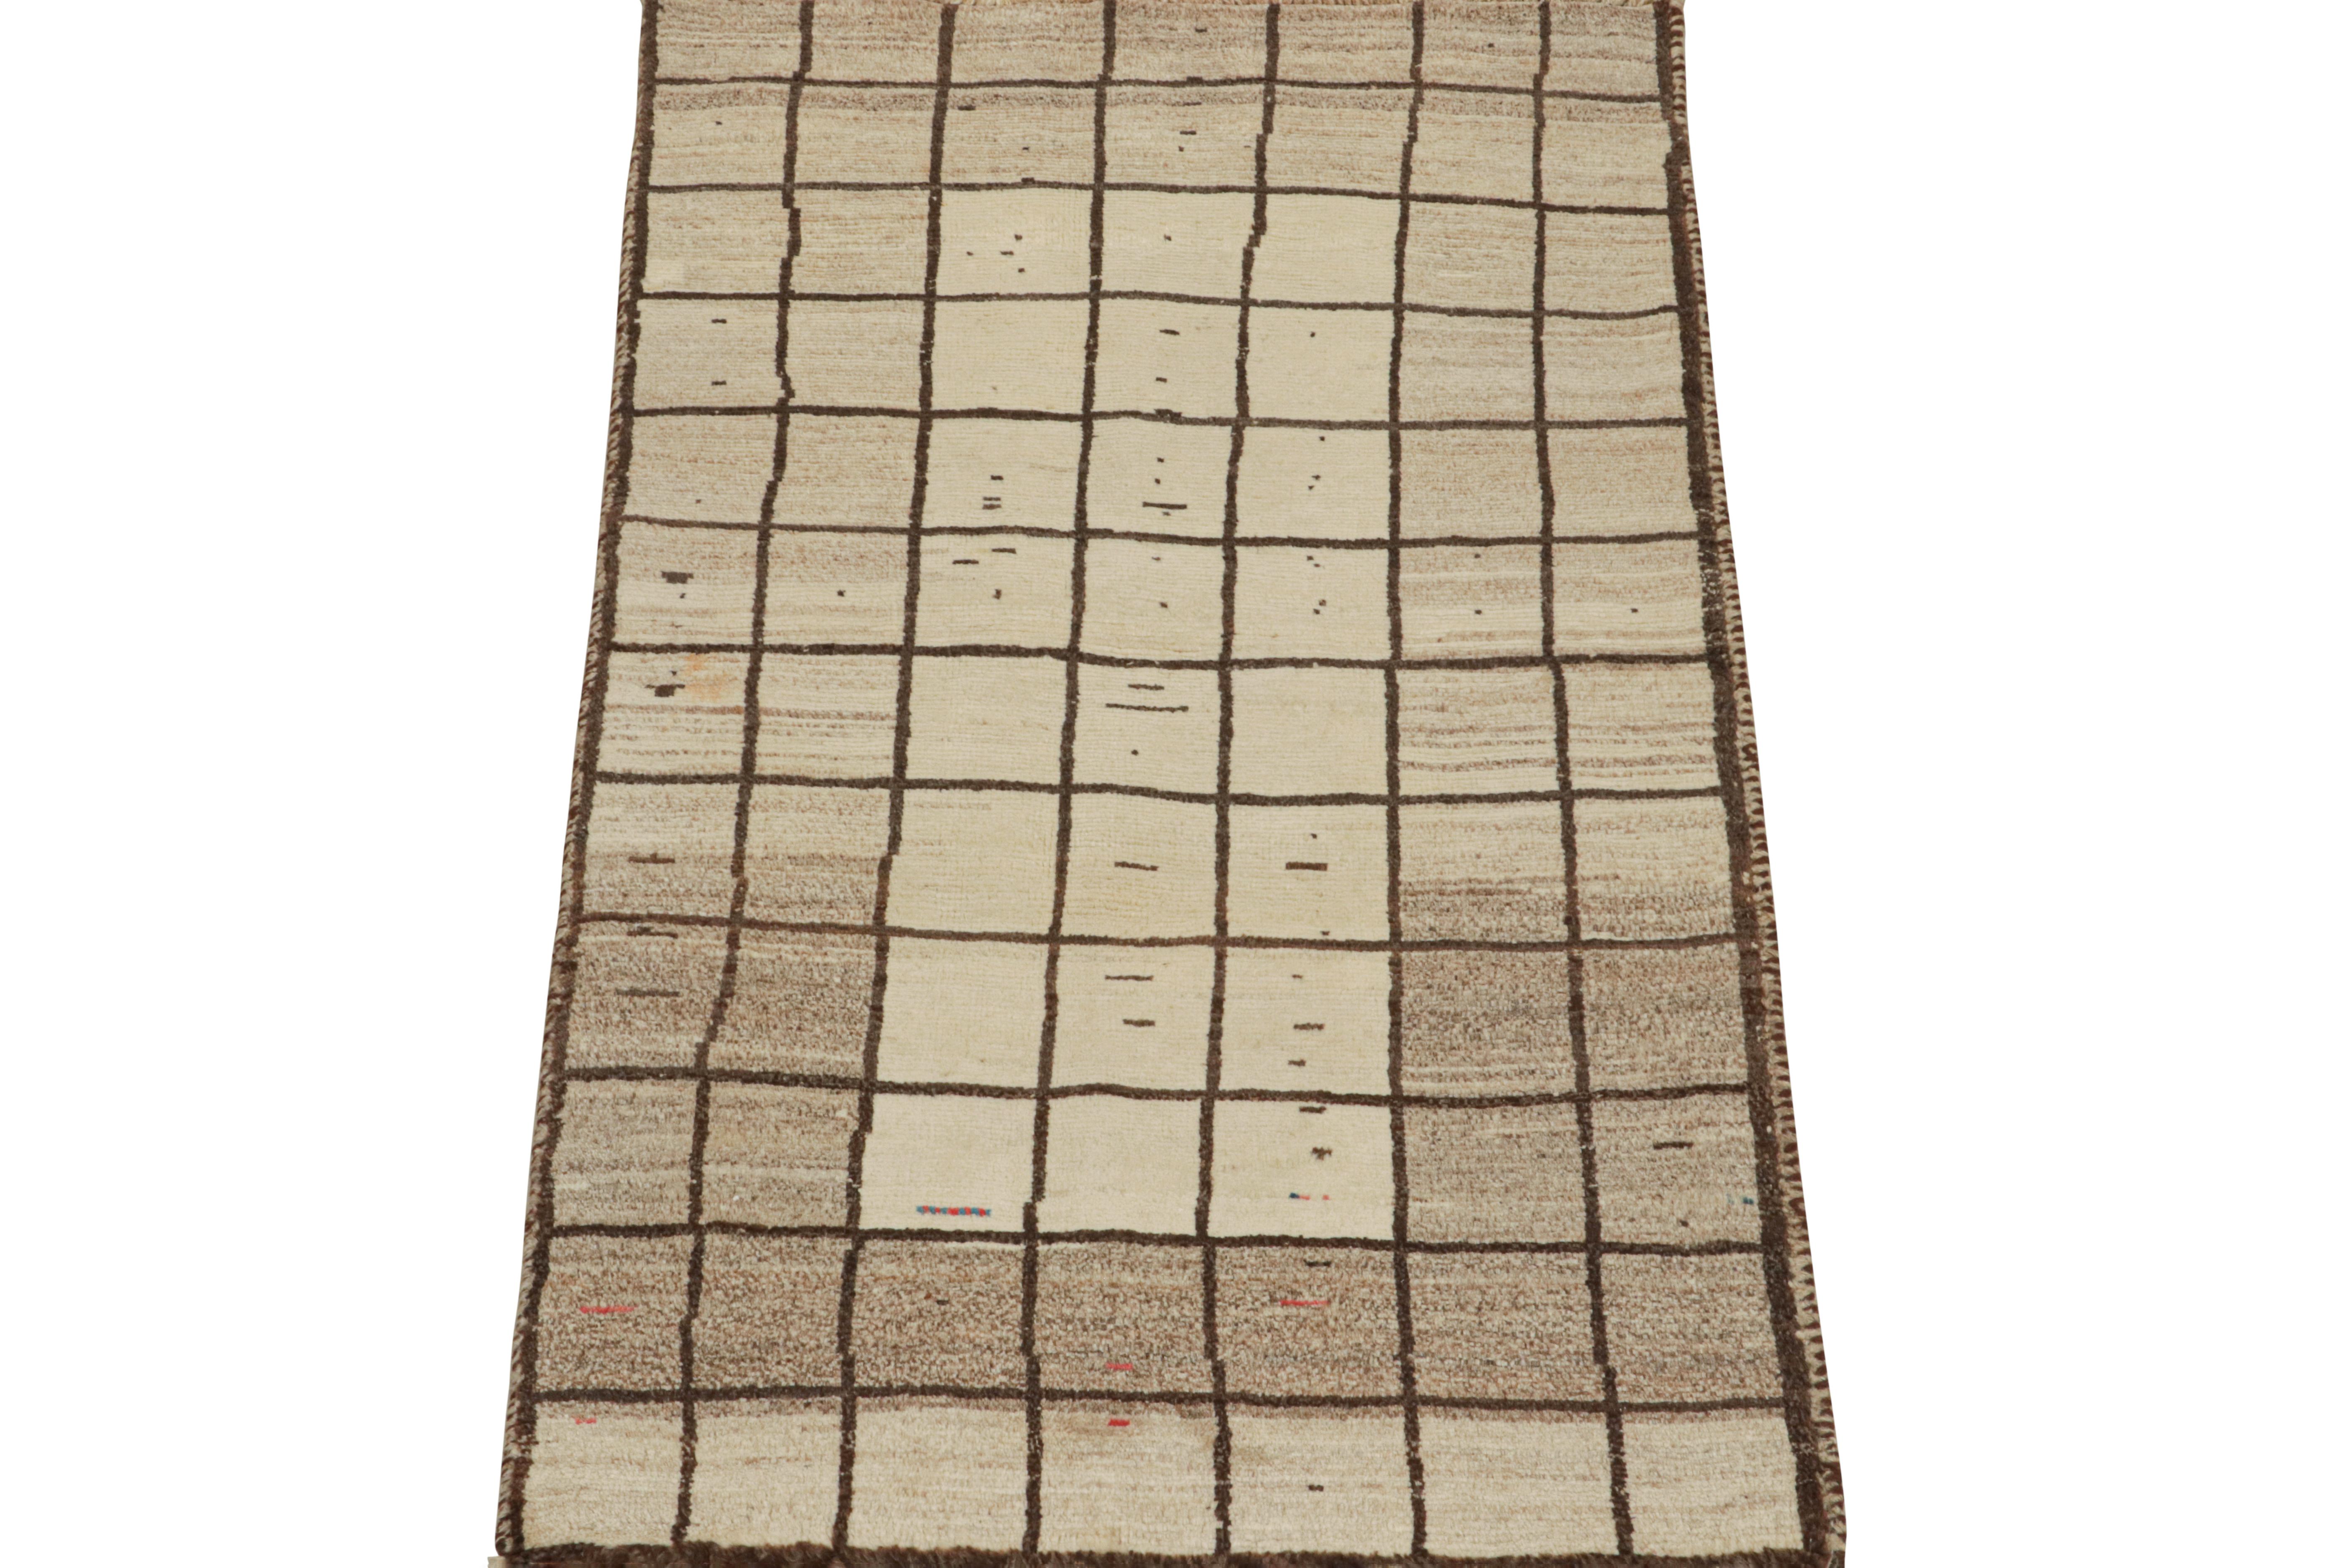 This vintage 3x6 Persian runner is a Gabbeh rug that originates from the Qashqai tribe—hand-knotted in wool circa 1950-1960.

Its geometric pattern enjoys a play of beige and brown in a grid with playful accents therein. Connoisseurs will further